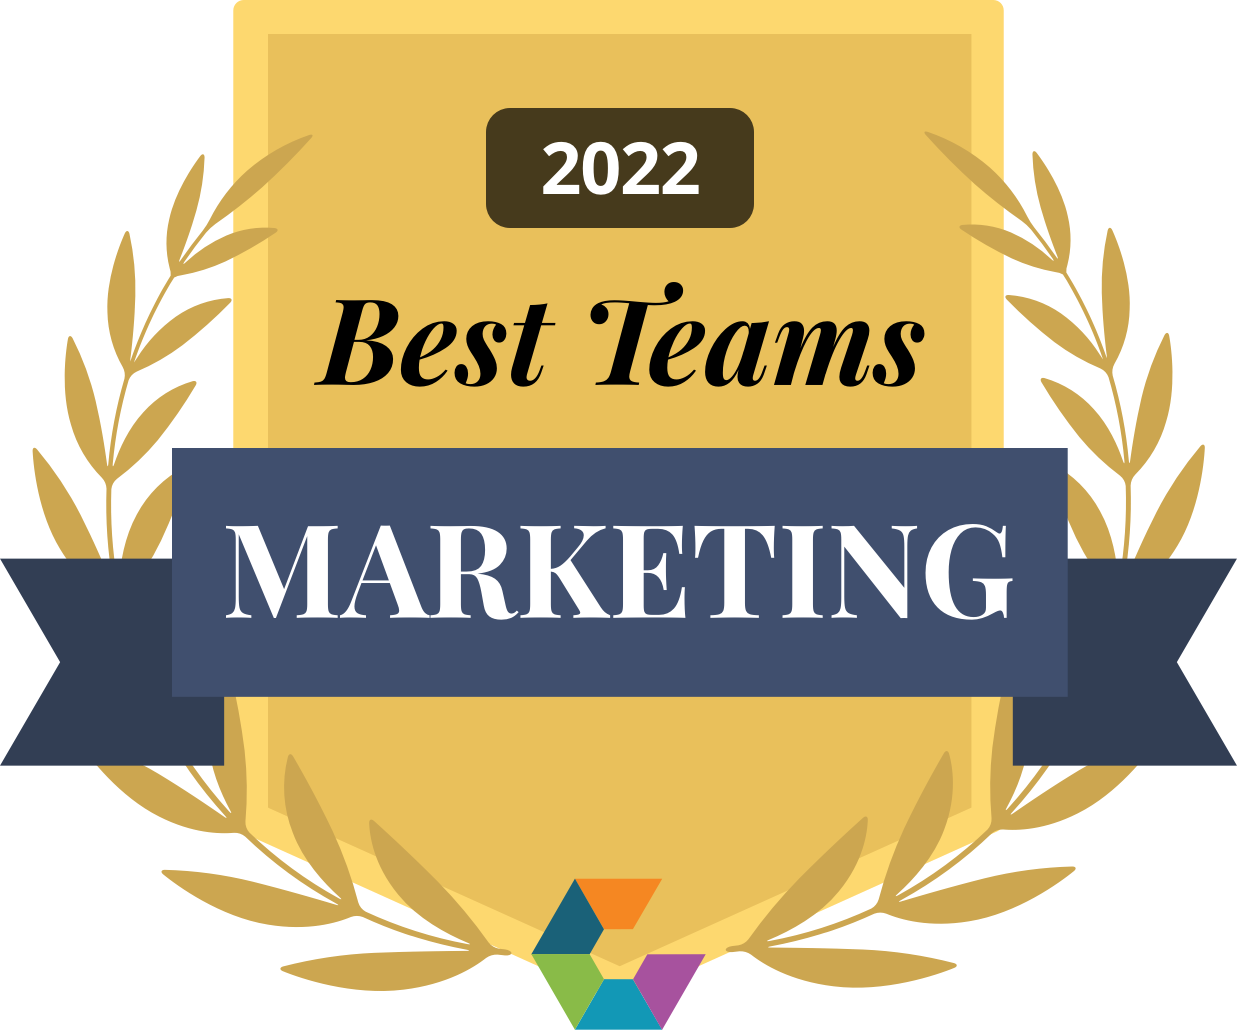 comparably best teams marketing 2022